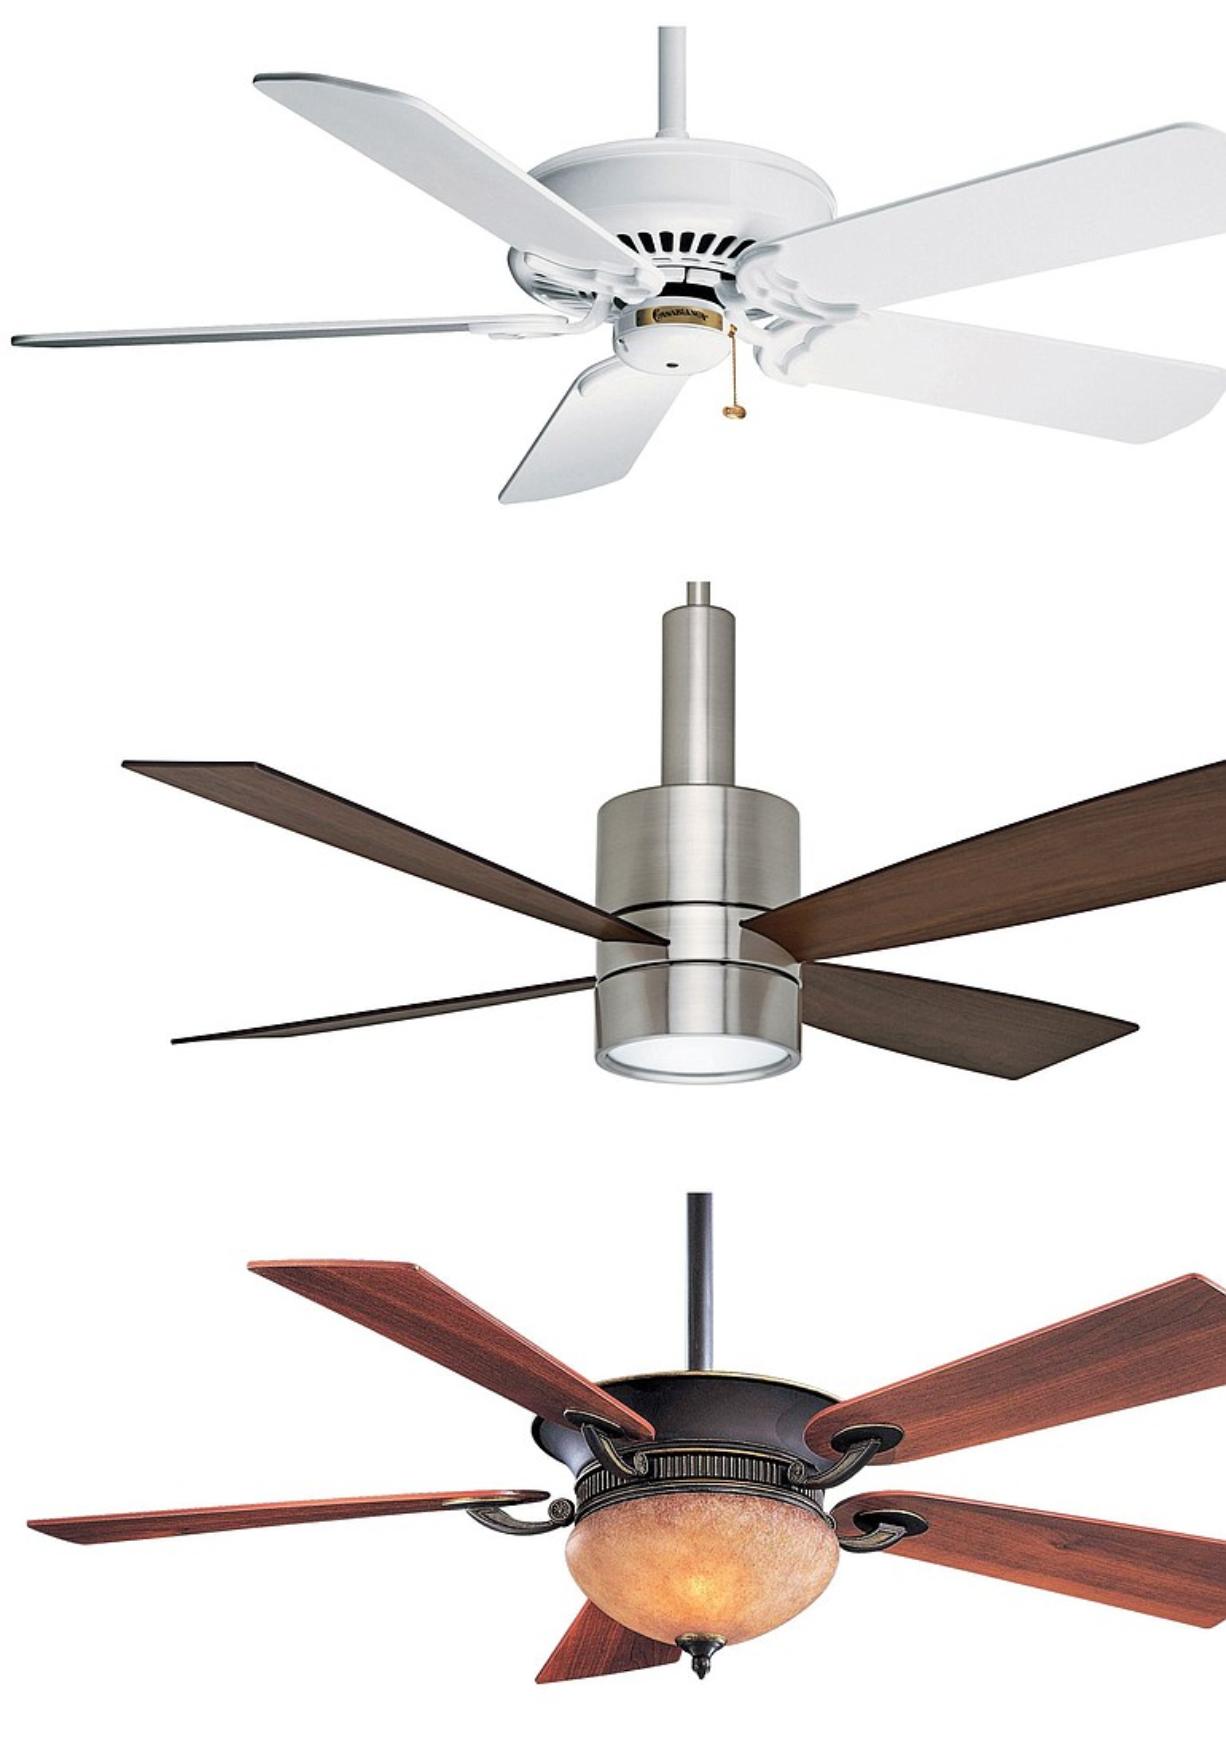 Recommended ceiling fans: Delano by Minka-Aire ($429), from bottom; Panama by Casablanca ($299); and Bullet by Casablanca ($419).